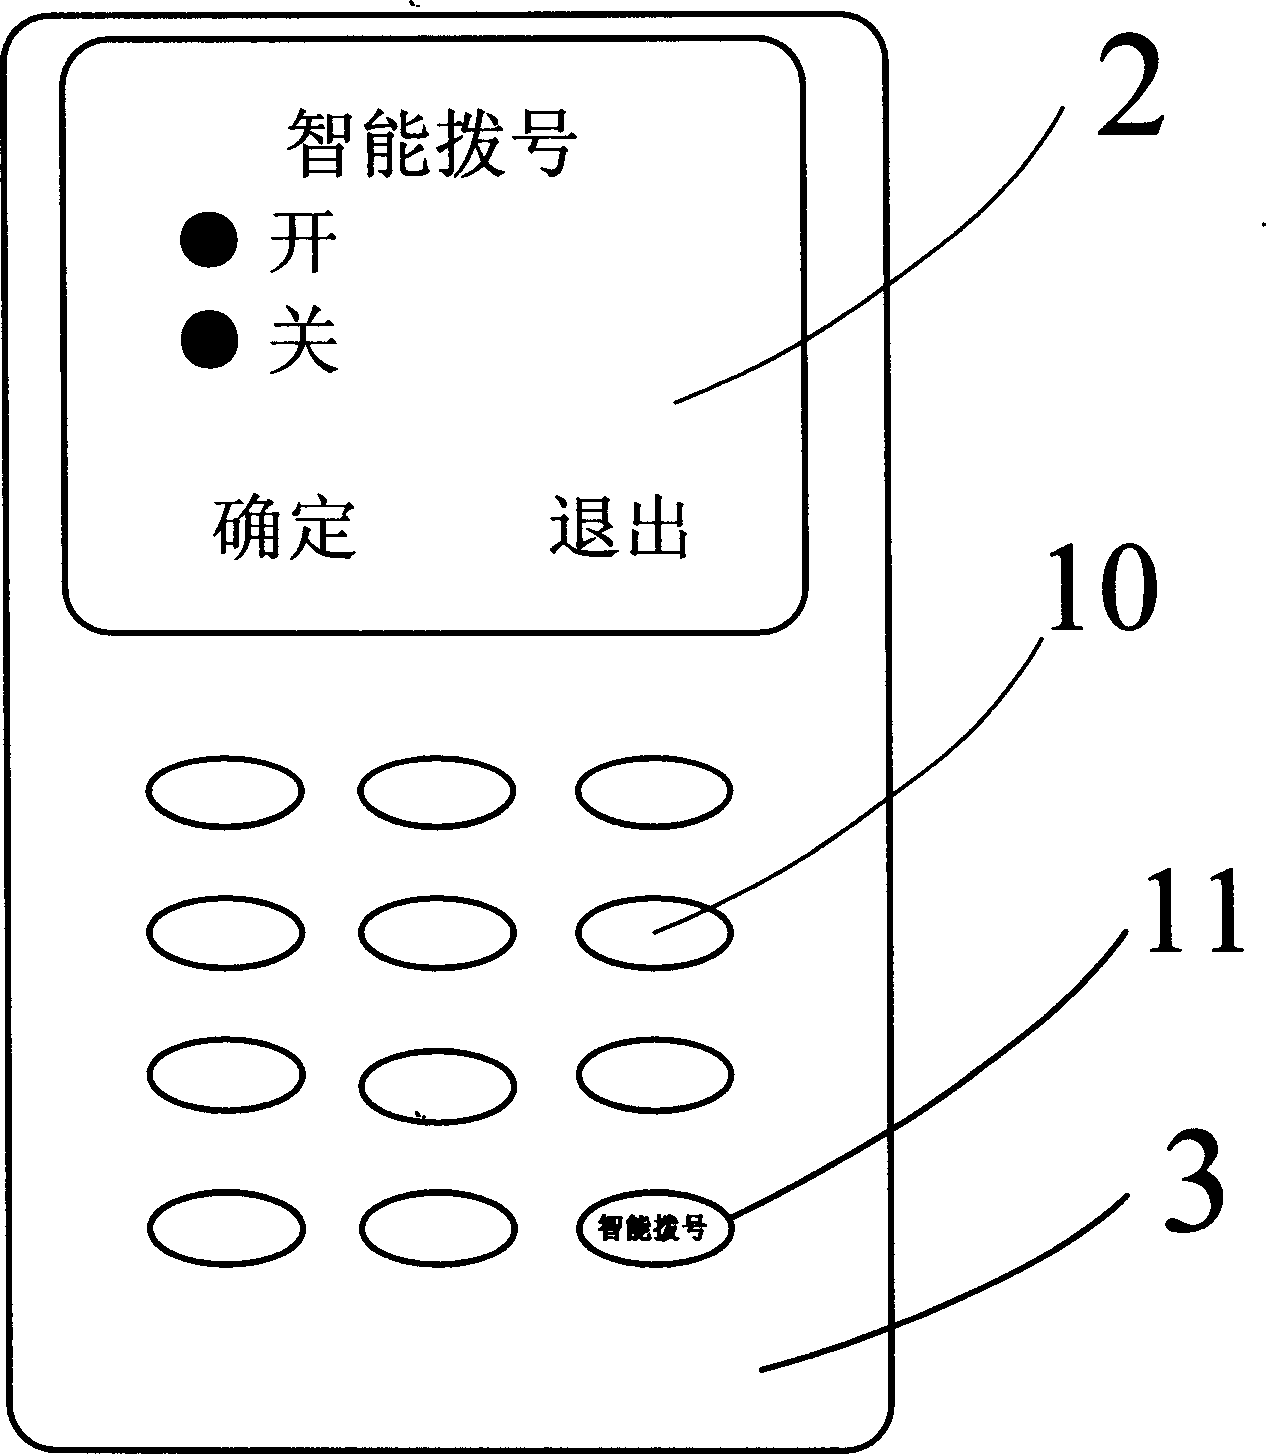 Telephone with intelligent dialling function and method for implementing intelligent dialling